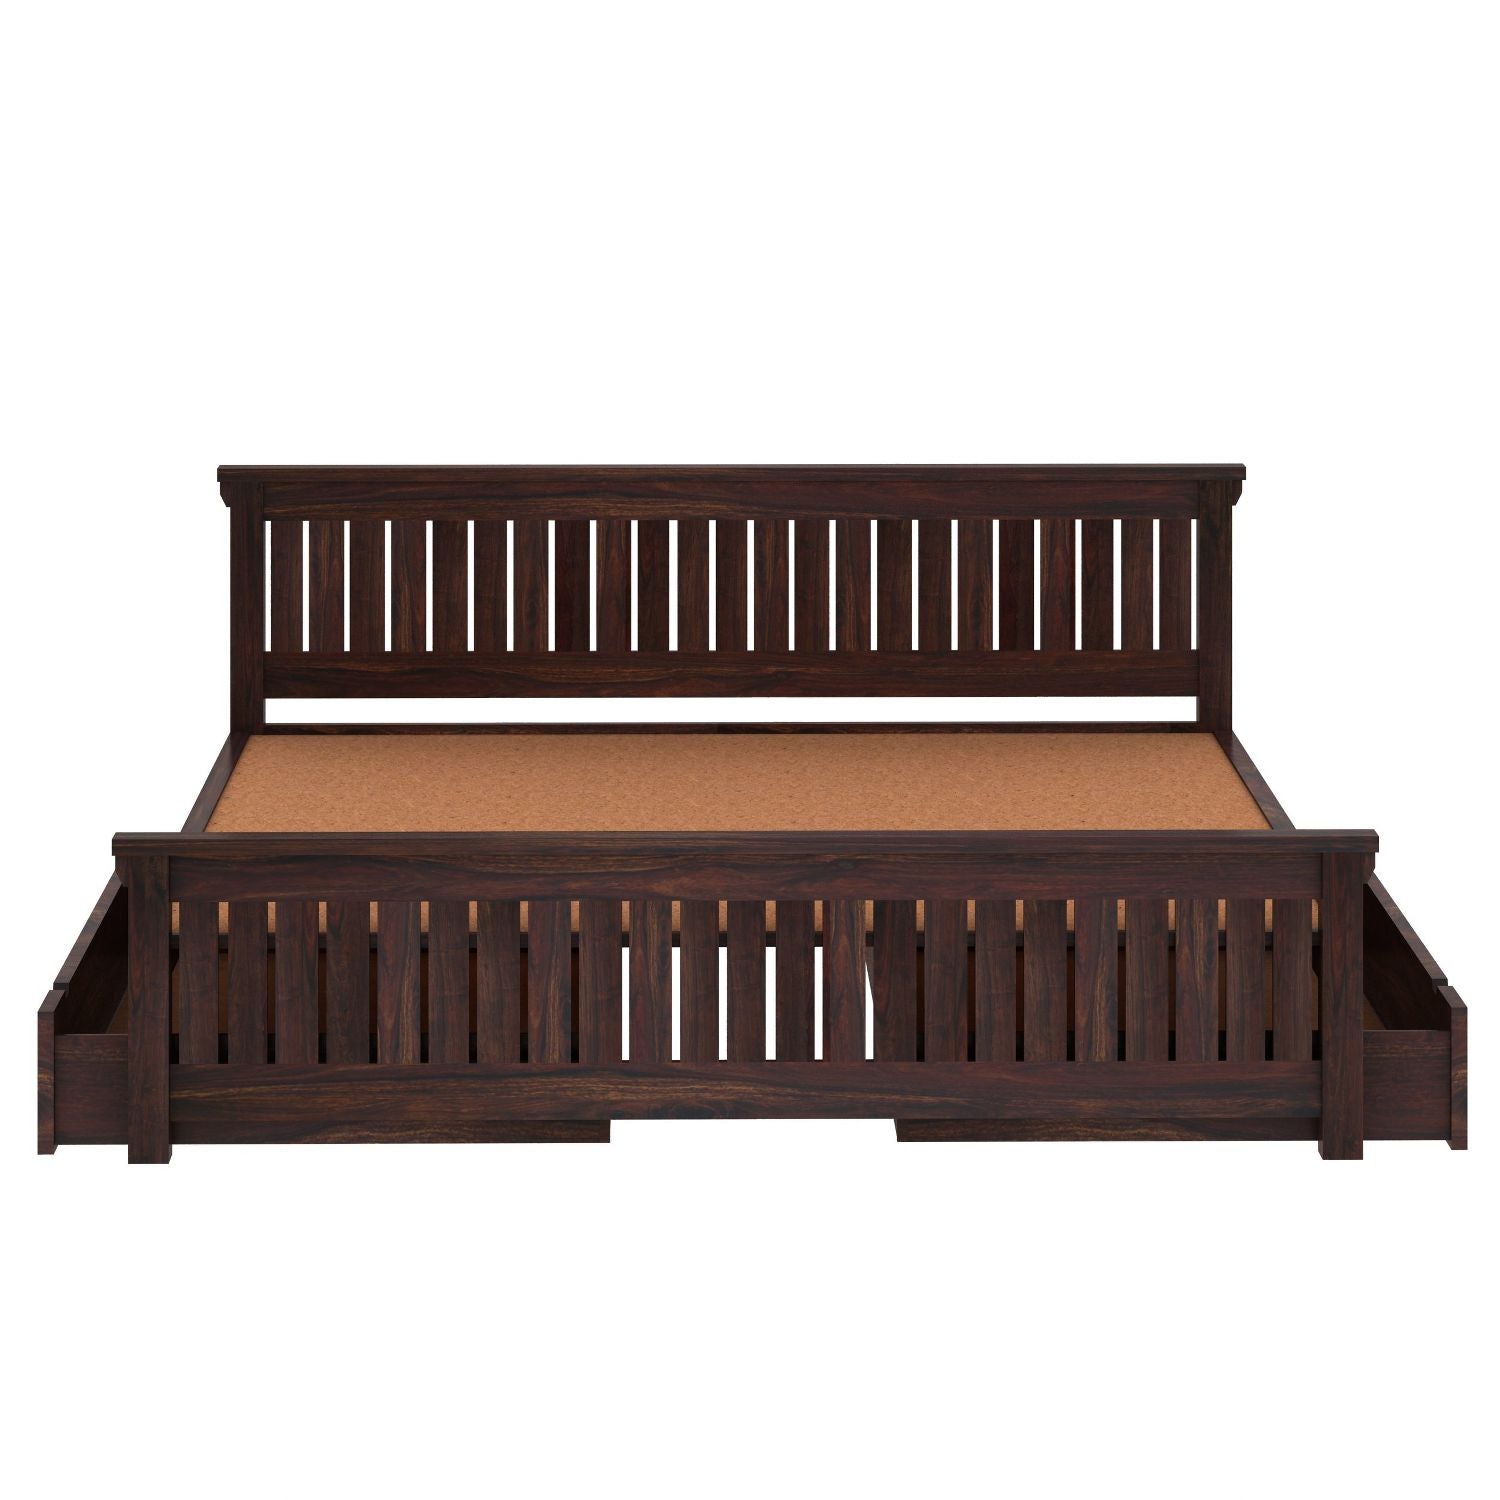 Trinity Solid Sheesham Wood Bed With Two Drawers (King Size, Walnut Finish)